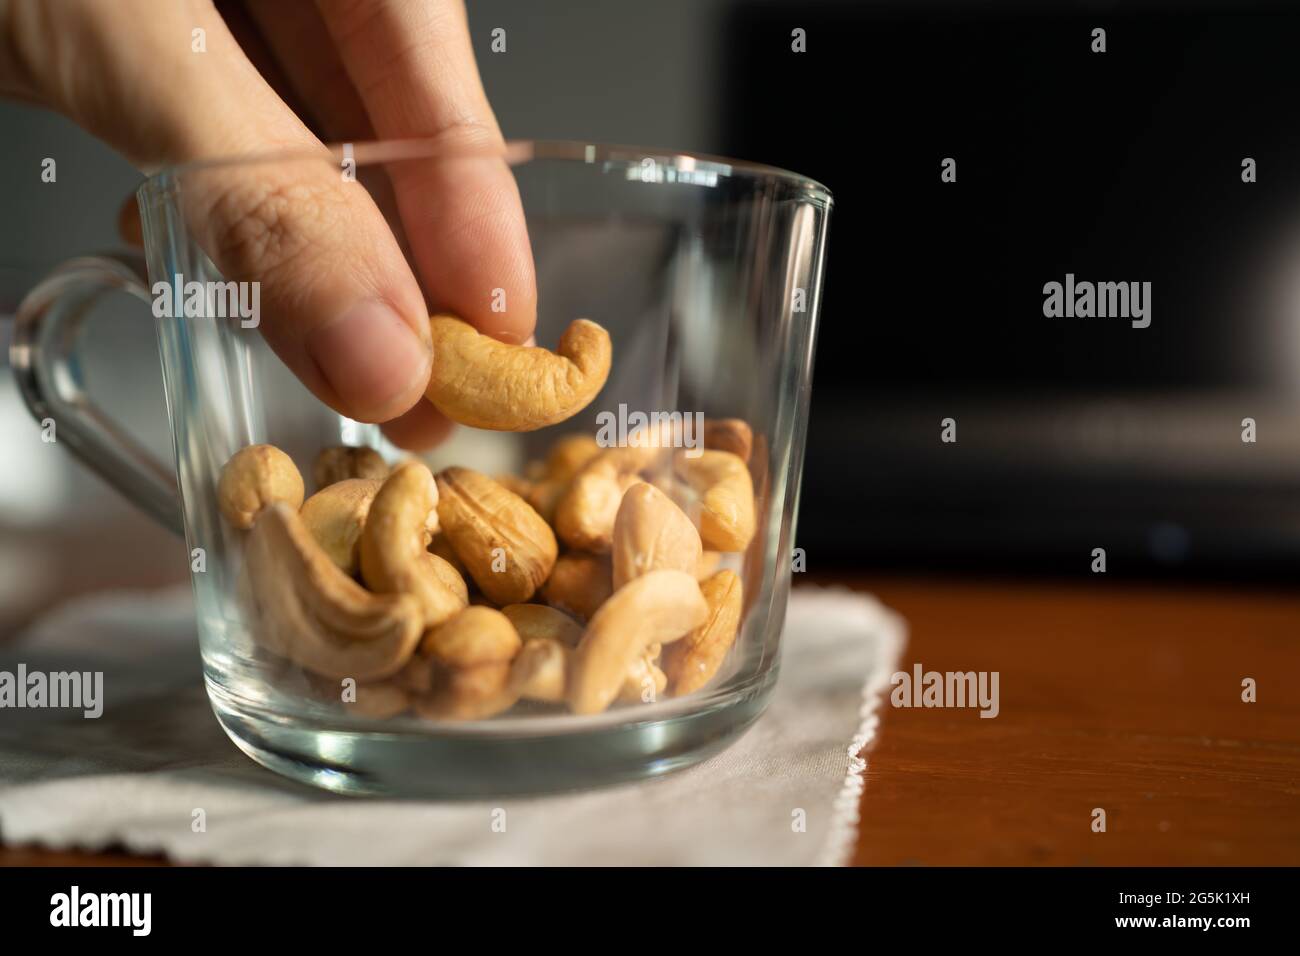 Picking roasted cashew nut from a cup Stock Photo